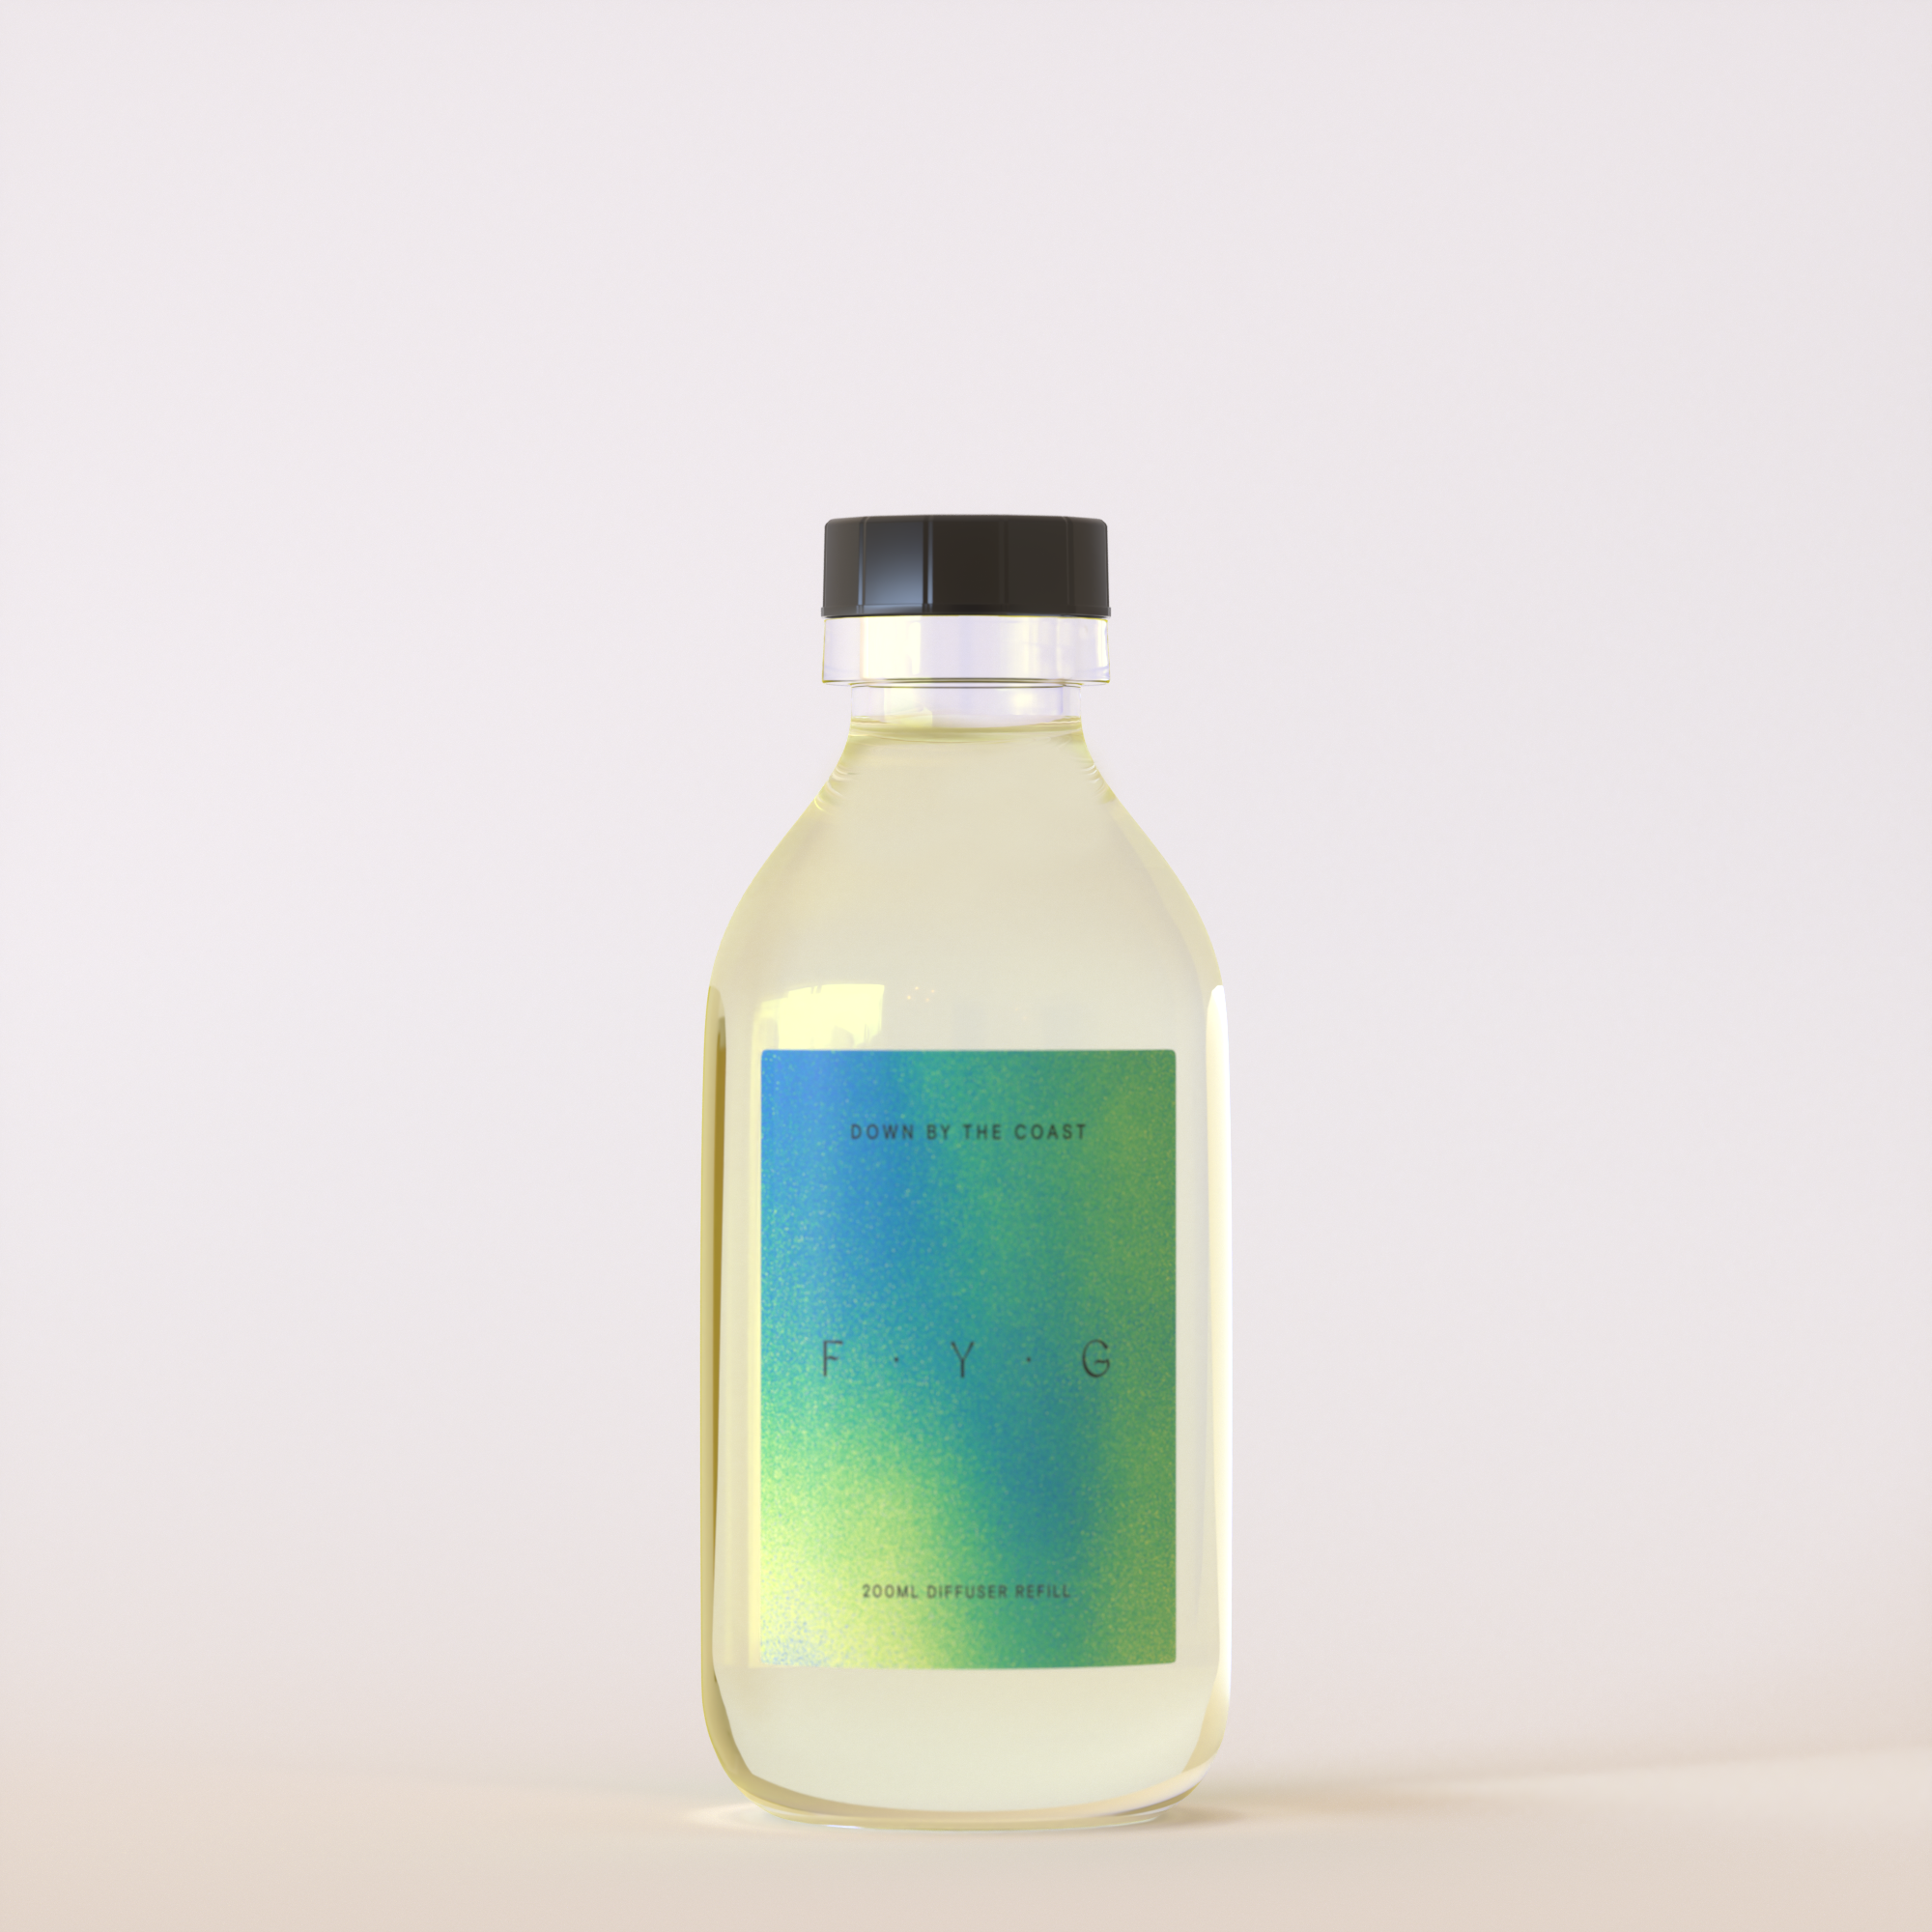 Find Your Glow Down By The Coast Diffuser Refill